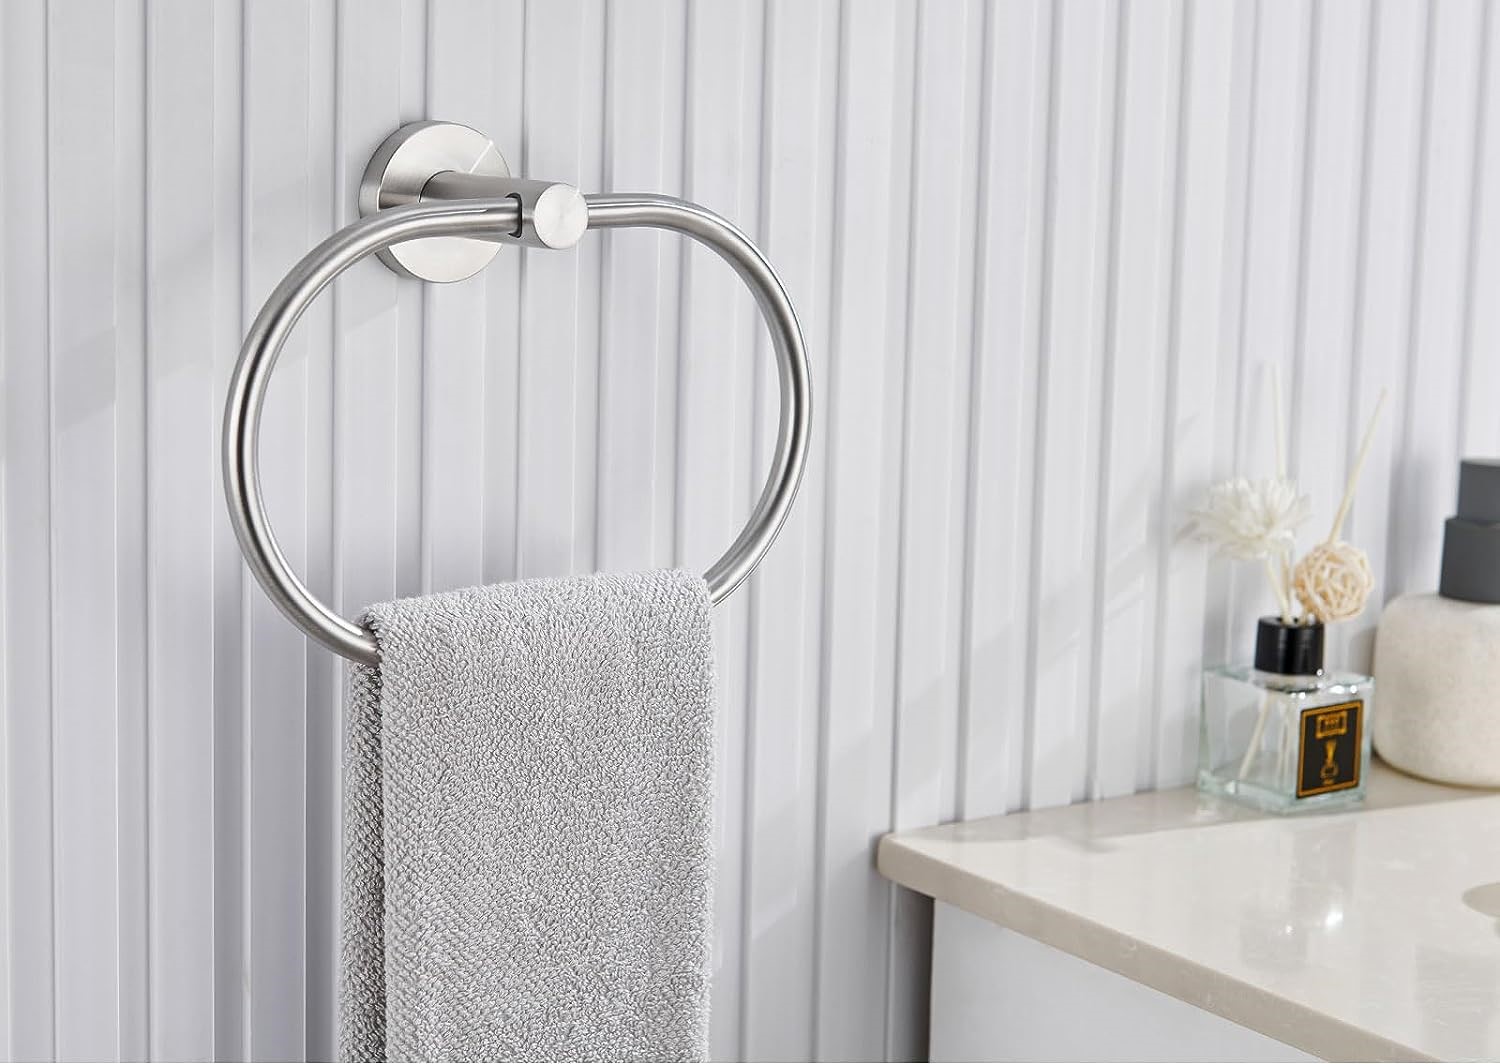 Where To Place Towel Rings in Your Bathroom